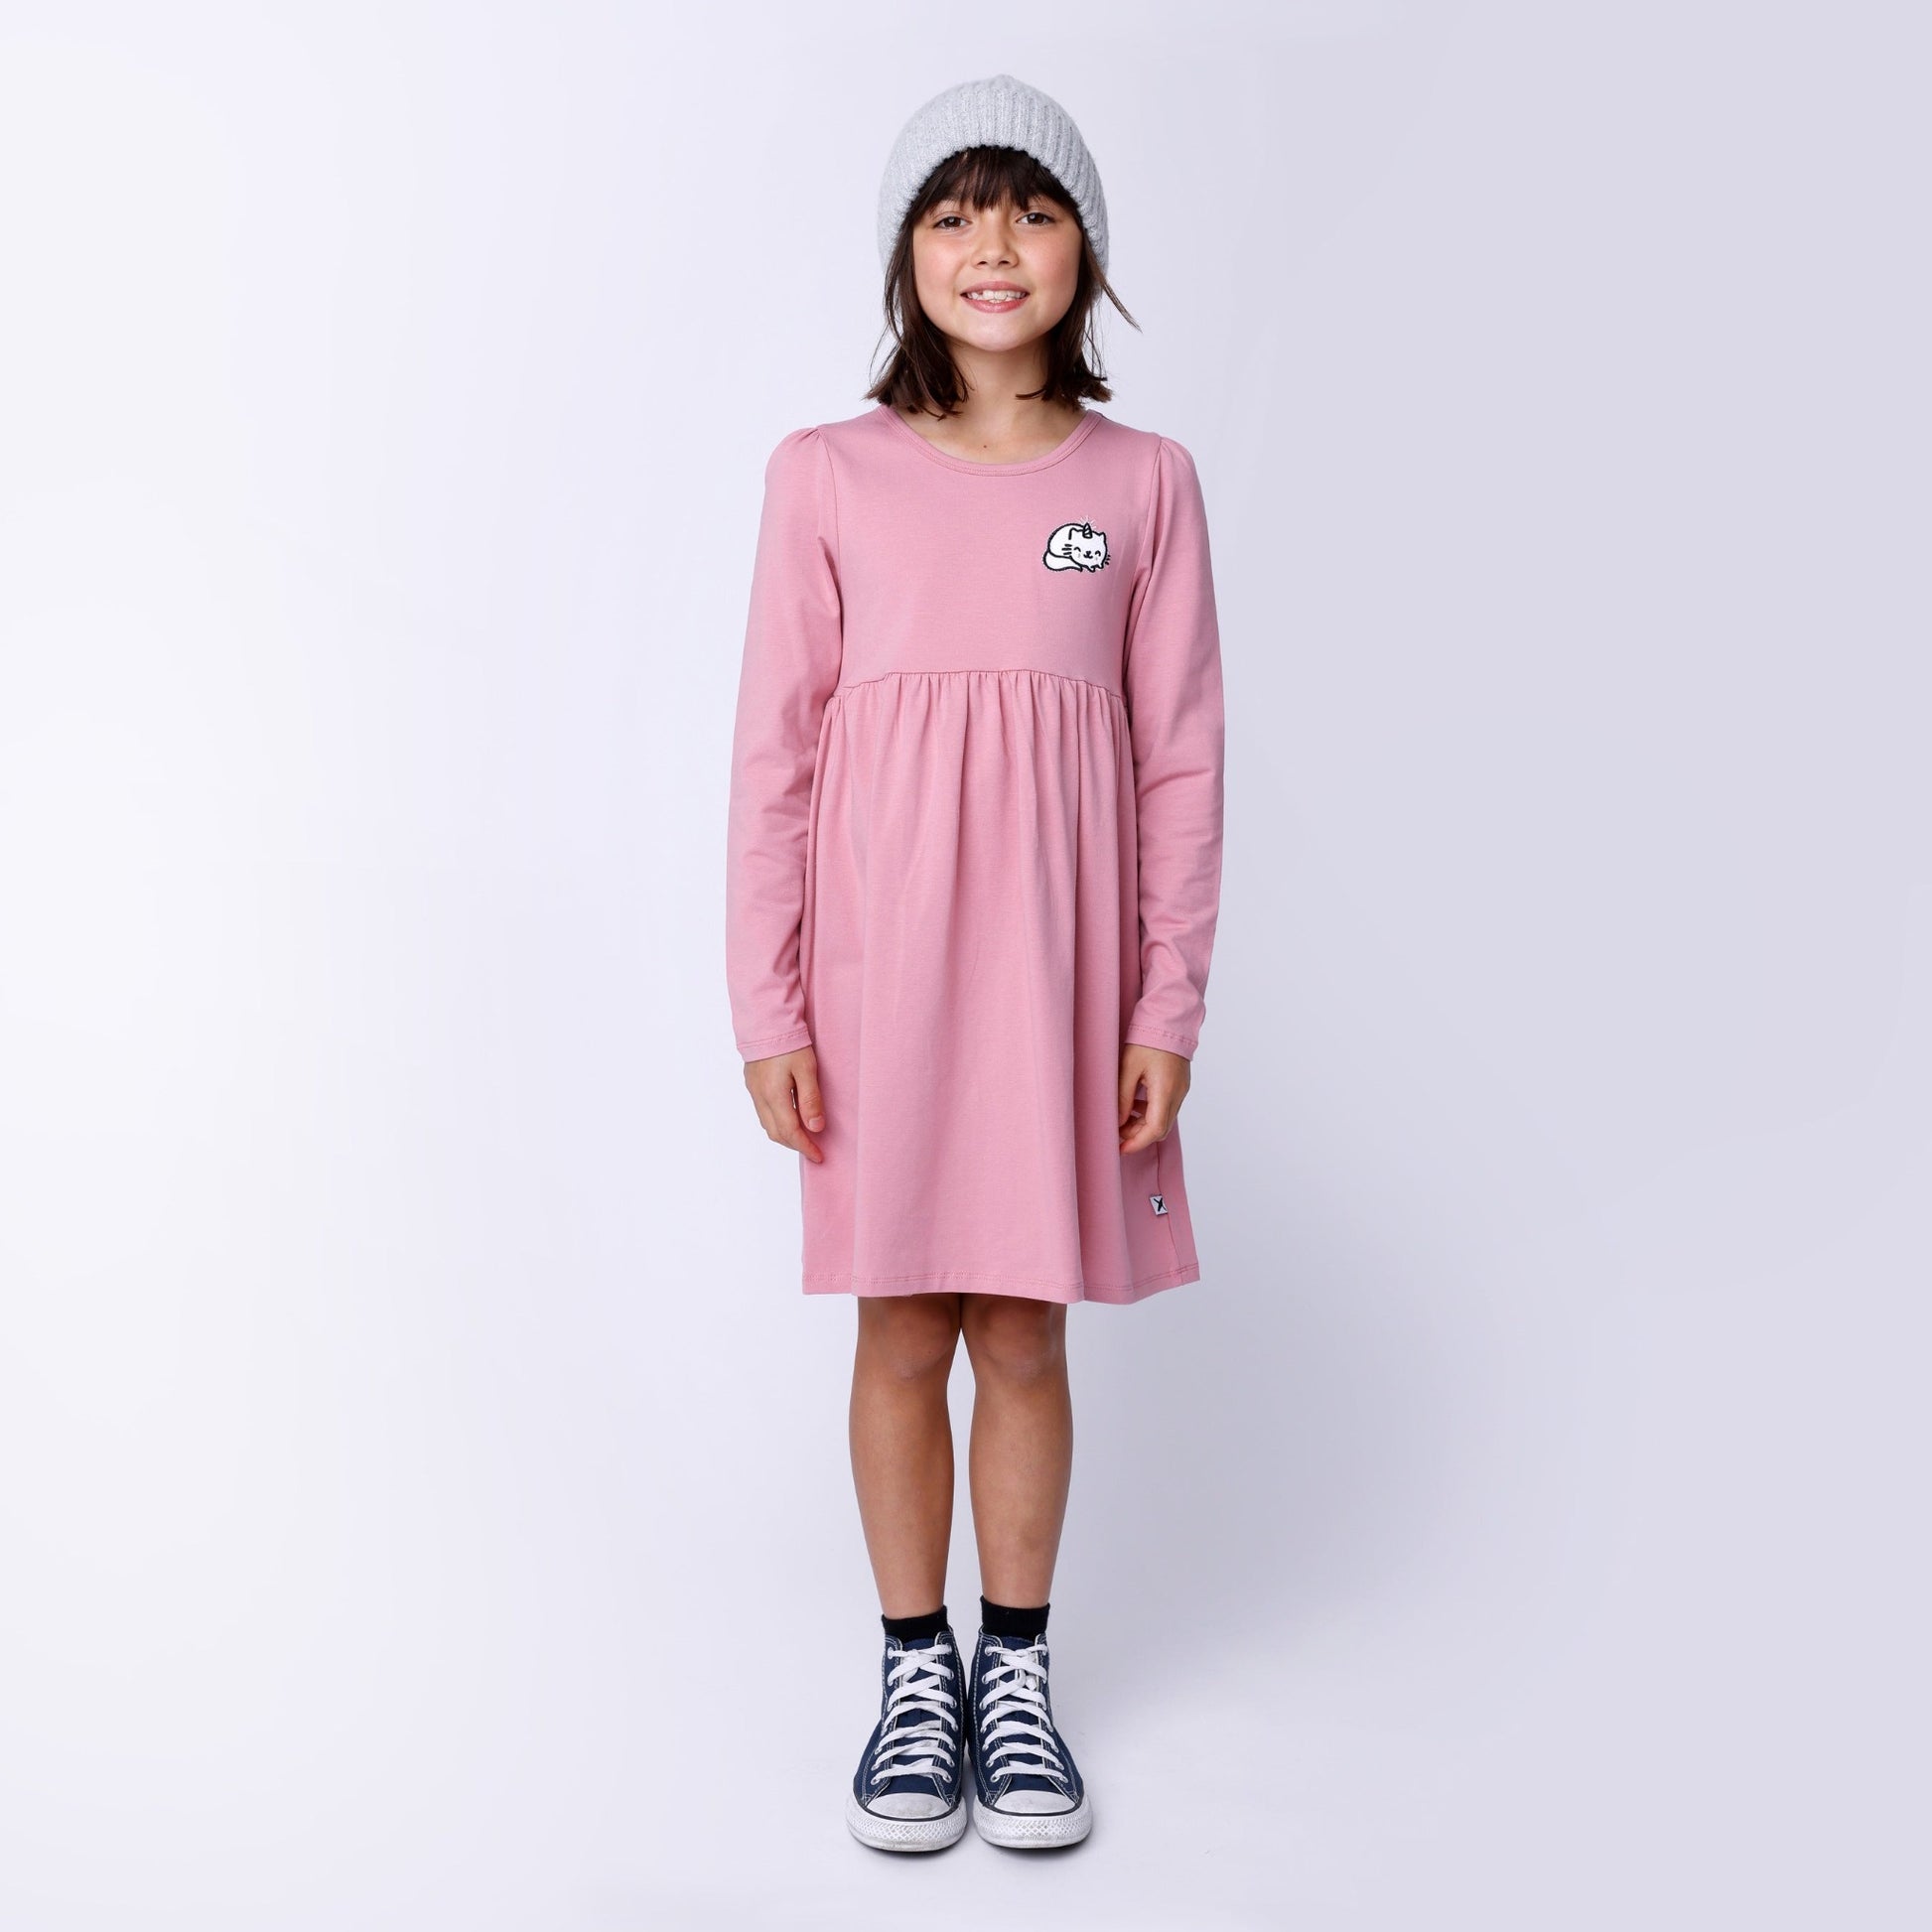 Pink Dress with small unicat print patch on top left shoulder. Long sleeves. 